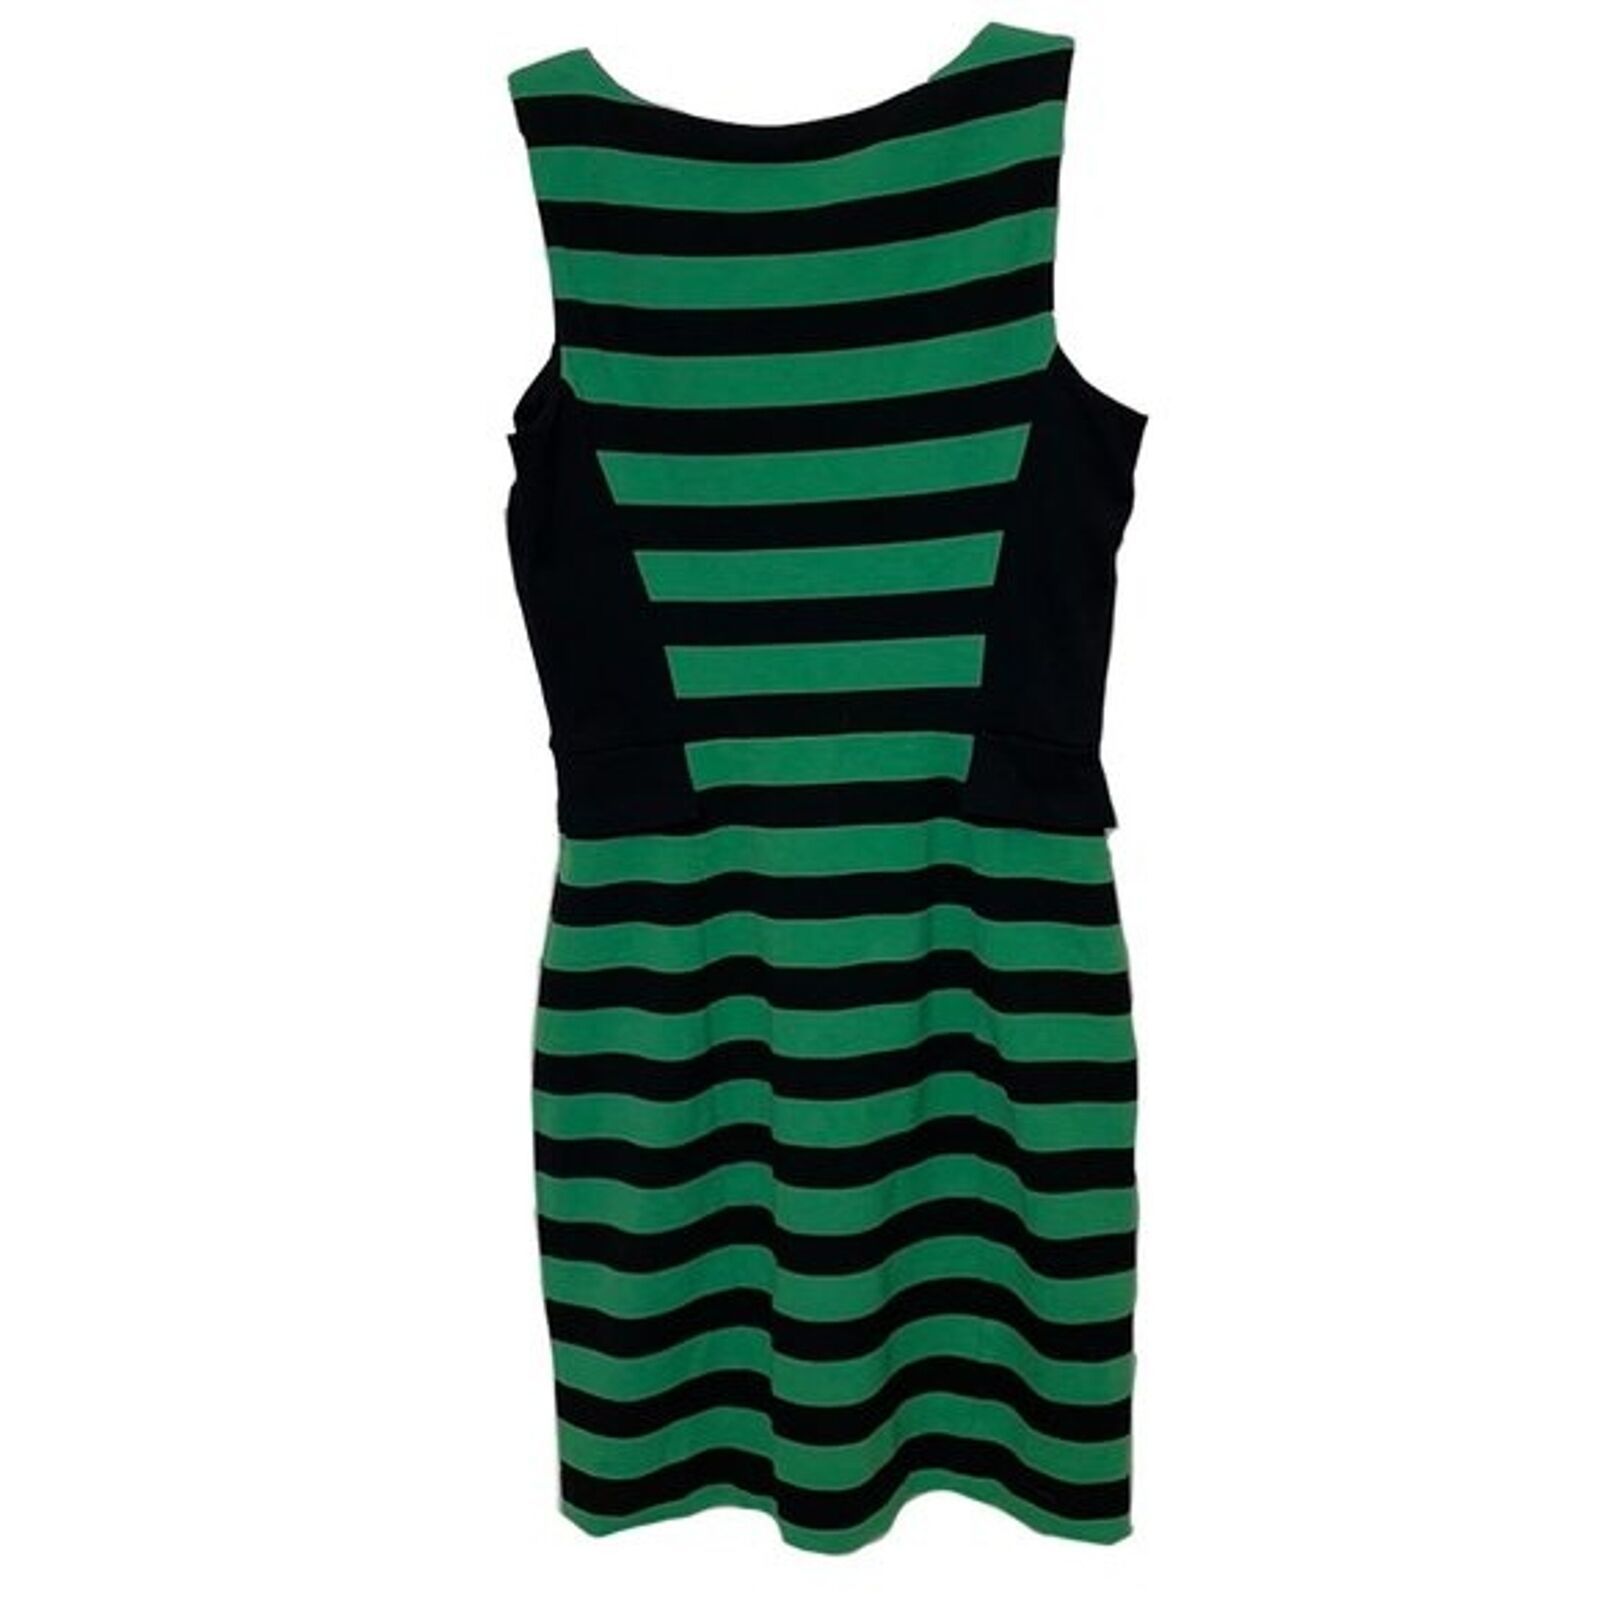 Primary image for Vince Camuto Shift Dress Womens Size 6 Green Black Striped Bodycon Sleeveless